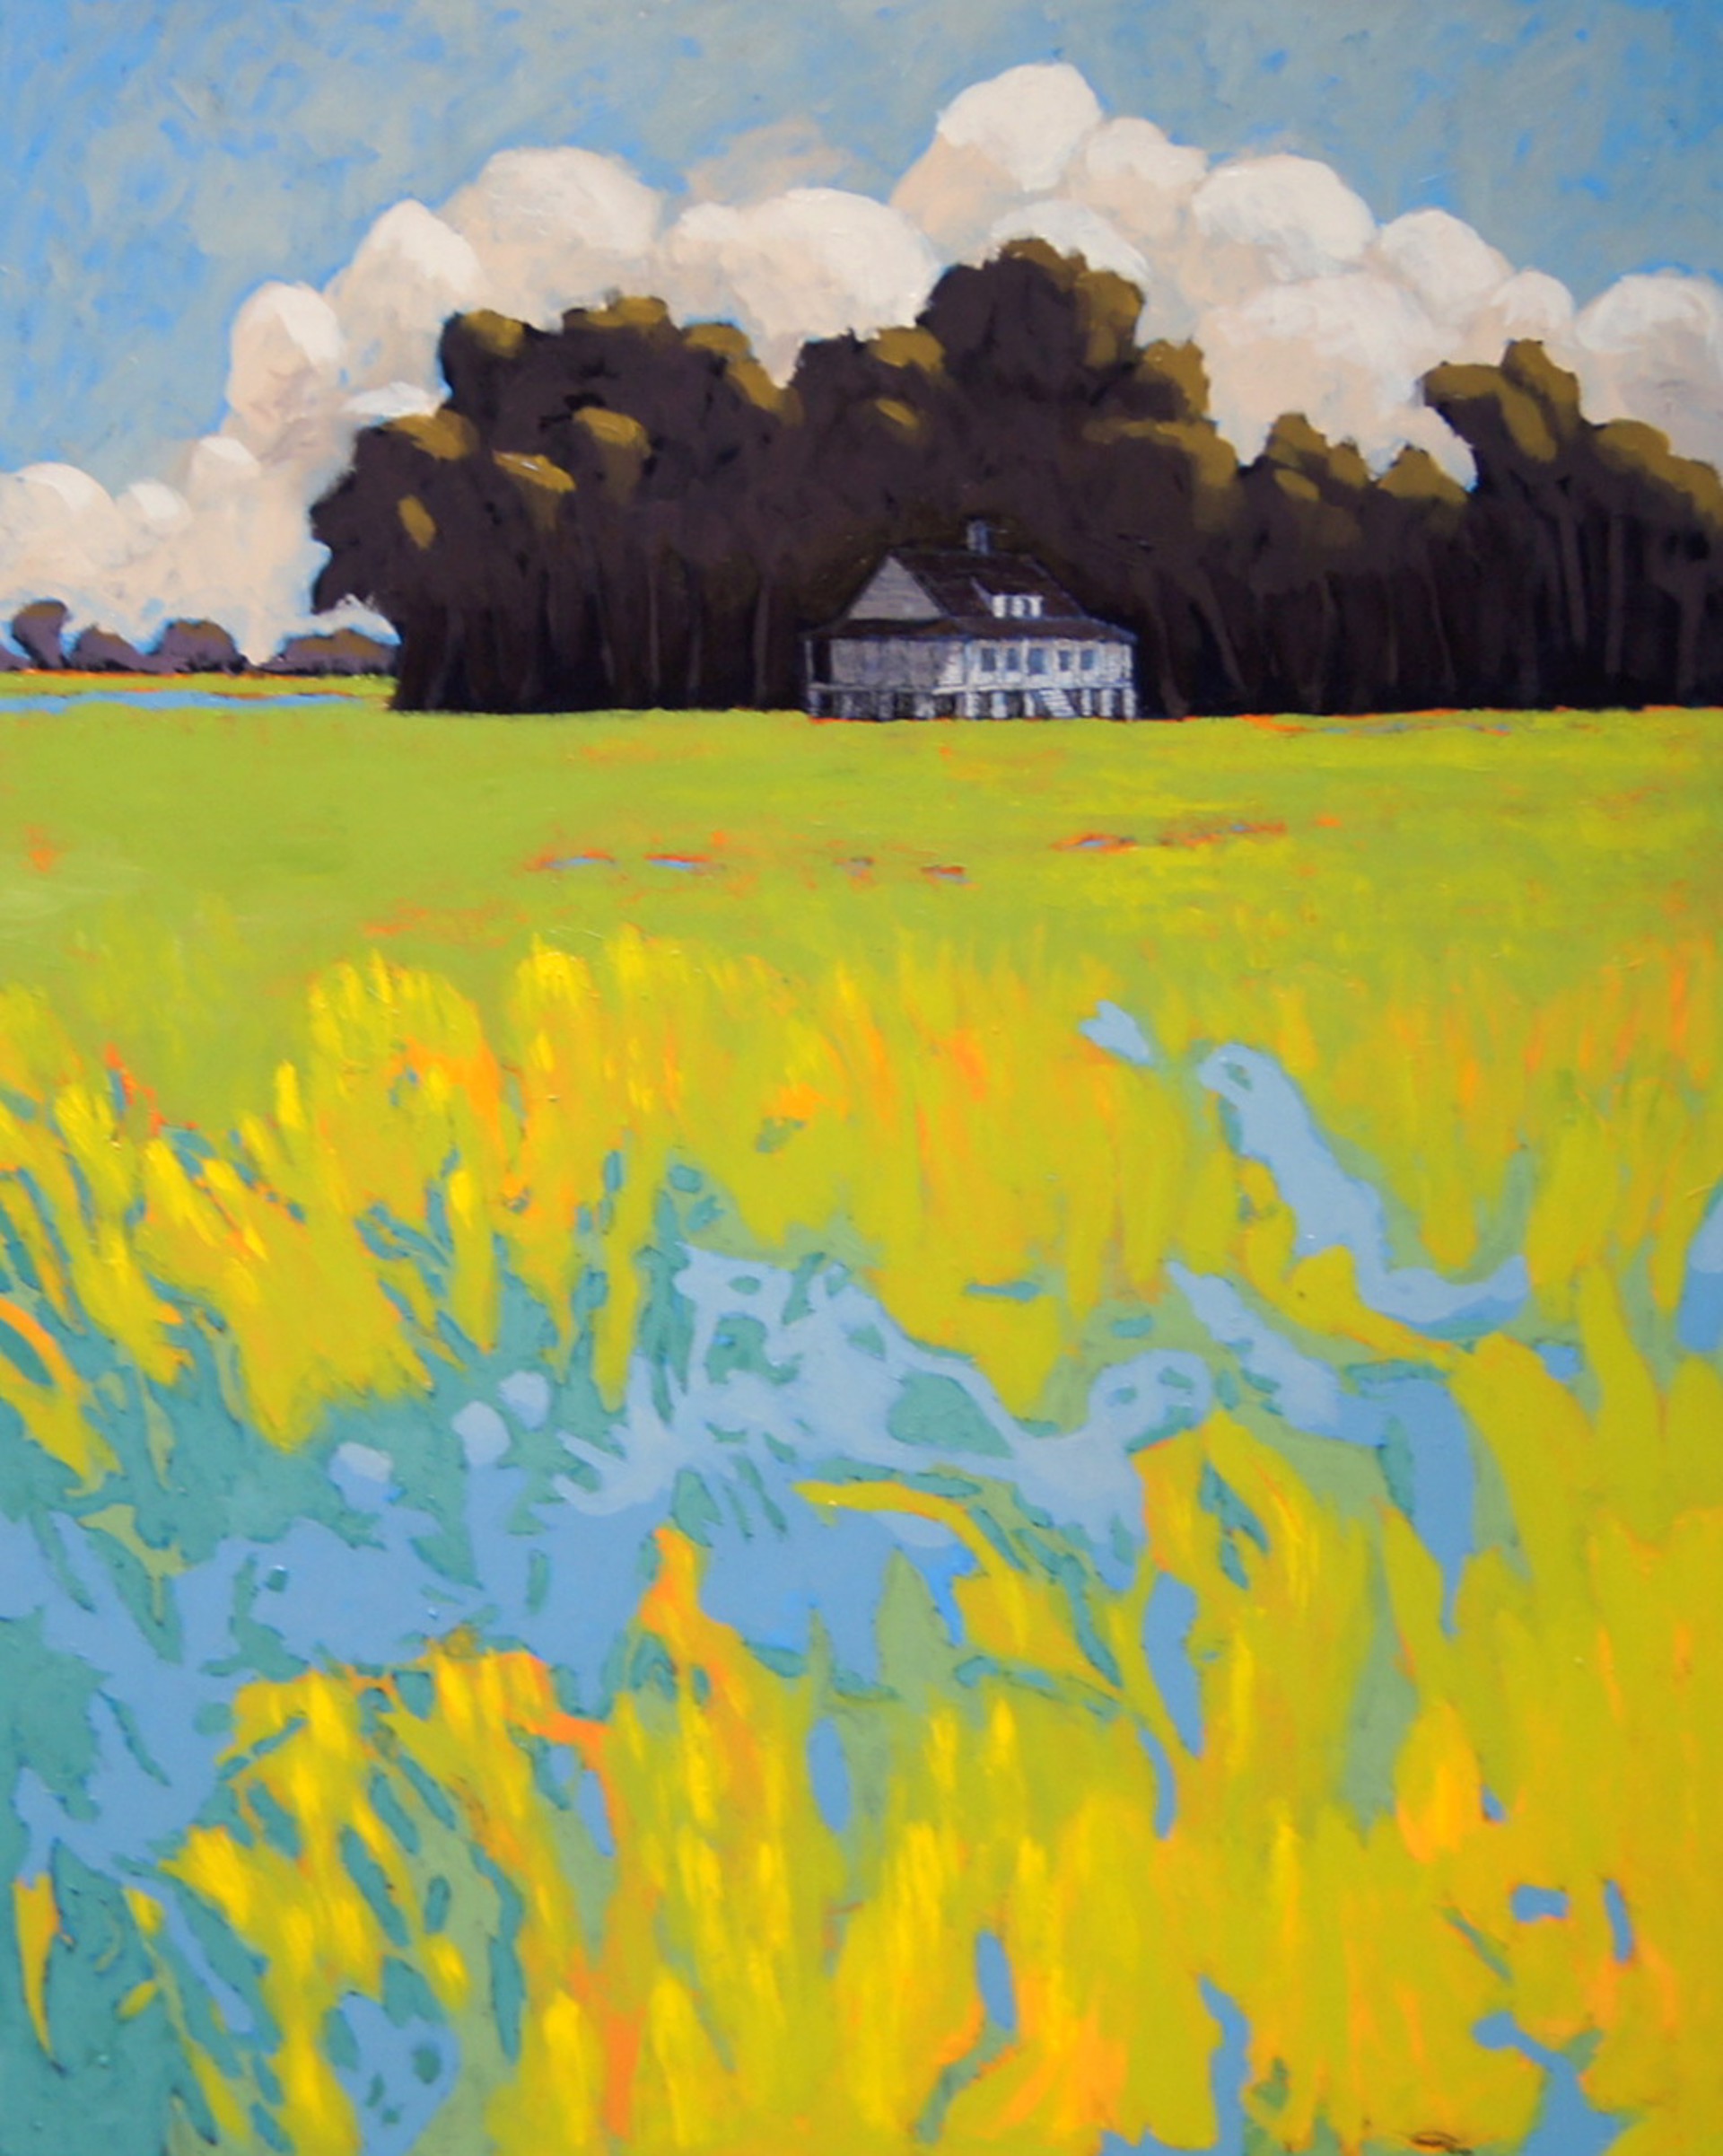 Lowcountry Homestead by John Townsend